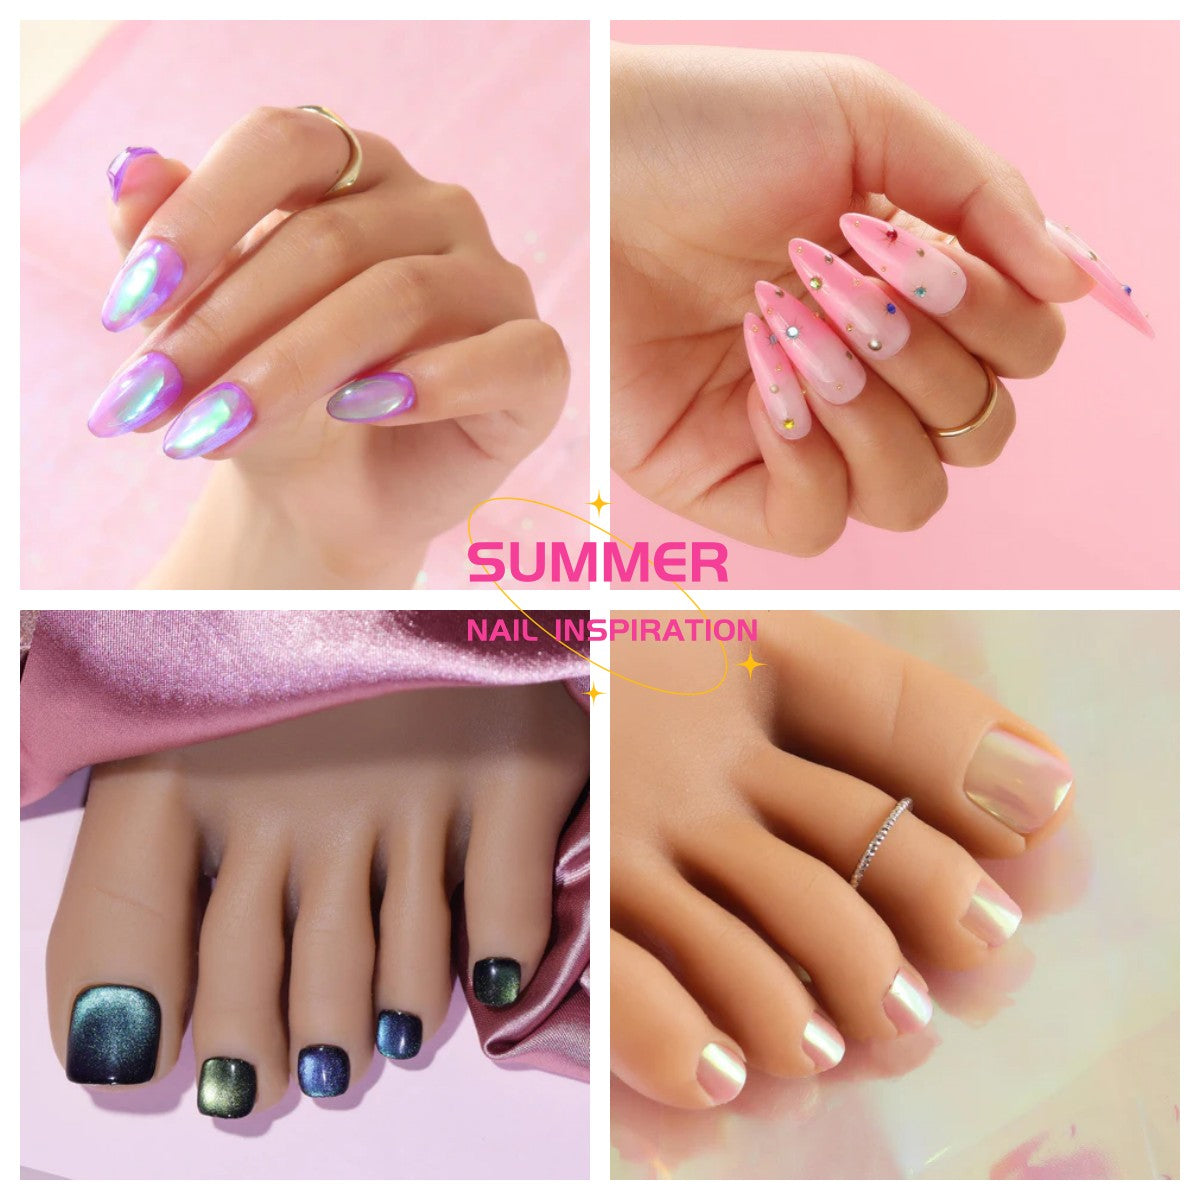 From Beachy to Bold: Summer Toe Nail Inspiration for Every Style